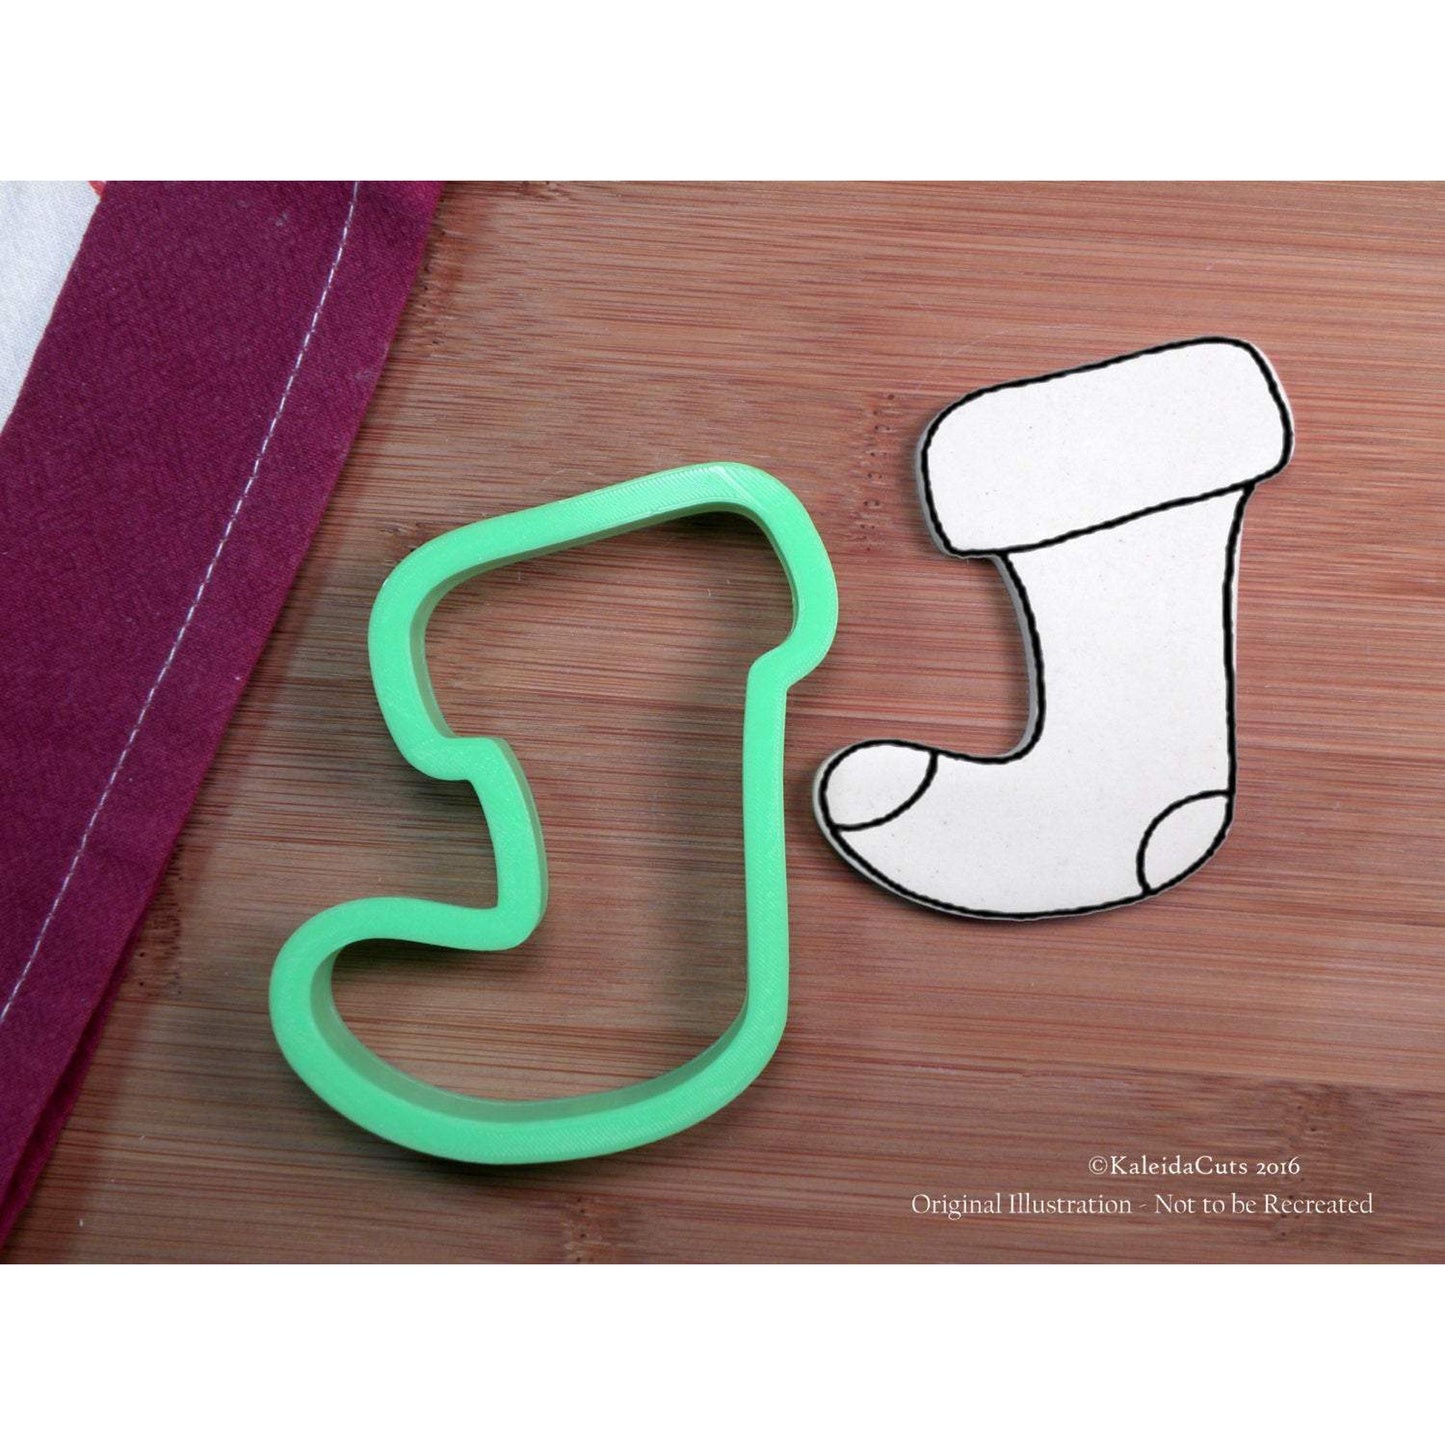 Stocking Cookie Cutter